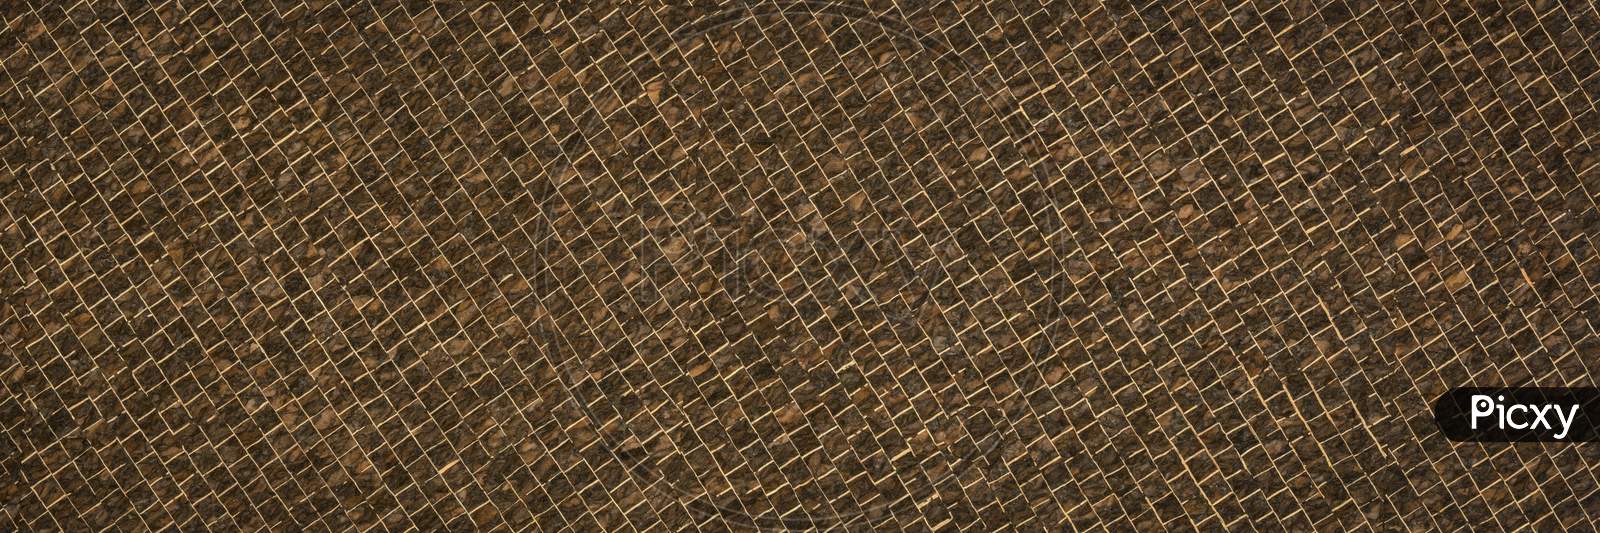 Portuguese Corkskin Paper Background. This Versatile, Naturally Water-Resistant Paper Is Hand Made In Portugal. Thin Layers Of Dark Brown Cork Are Laminated In A Tiny Grid Pattern Onto A Smooth Base Sheet. Panoramic Web Banner.